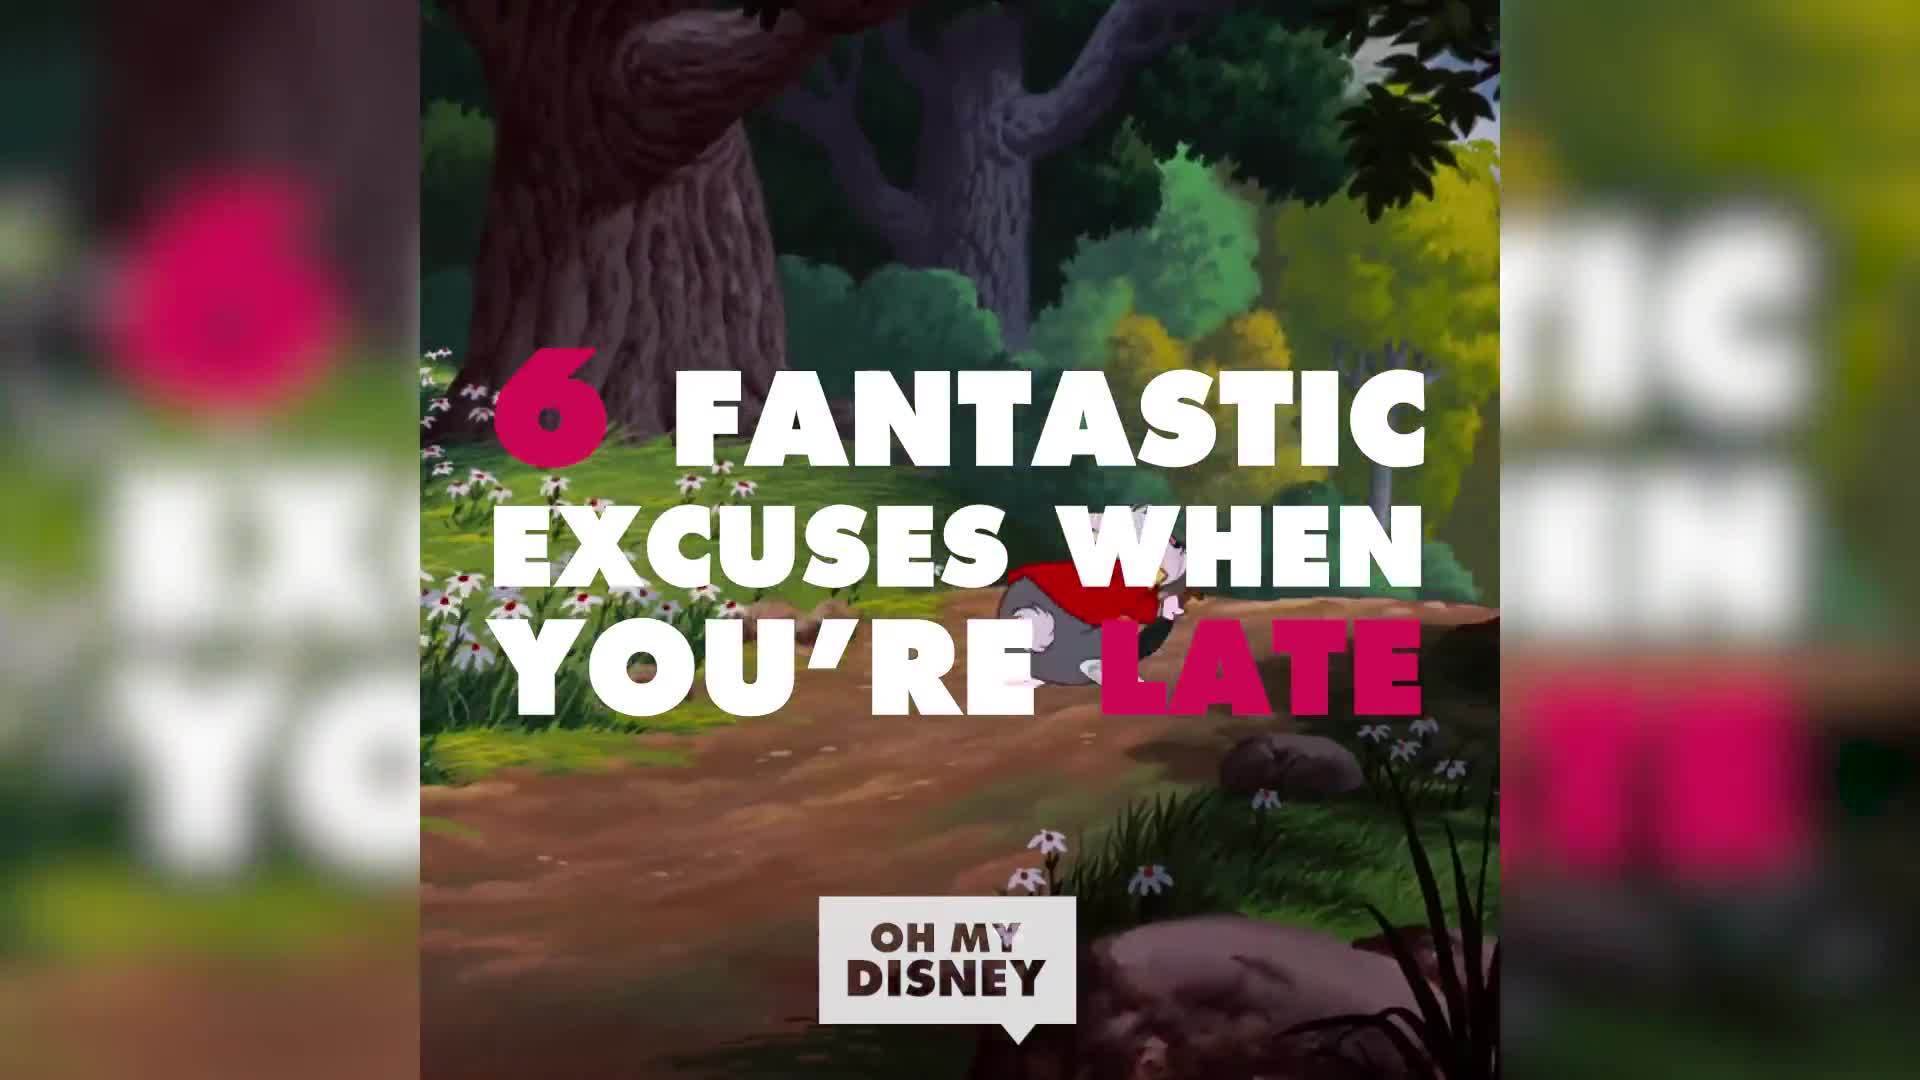 6 Fantastic Excuses When You're Late